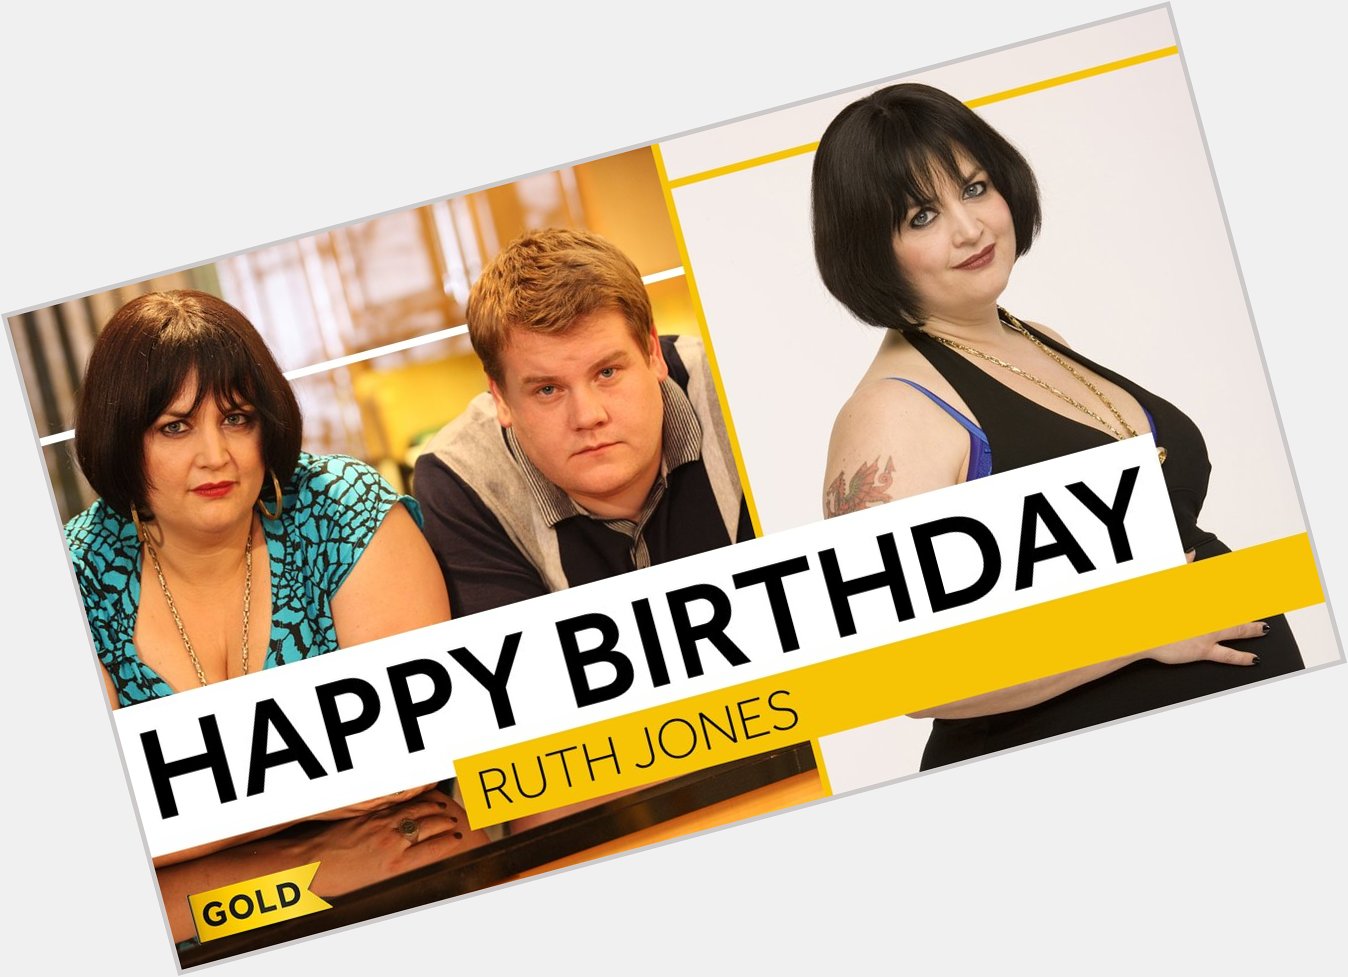 Oh! What\s occurring? We wanted to wish Ruth Jones a very Happy Birthday.        